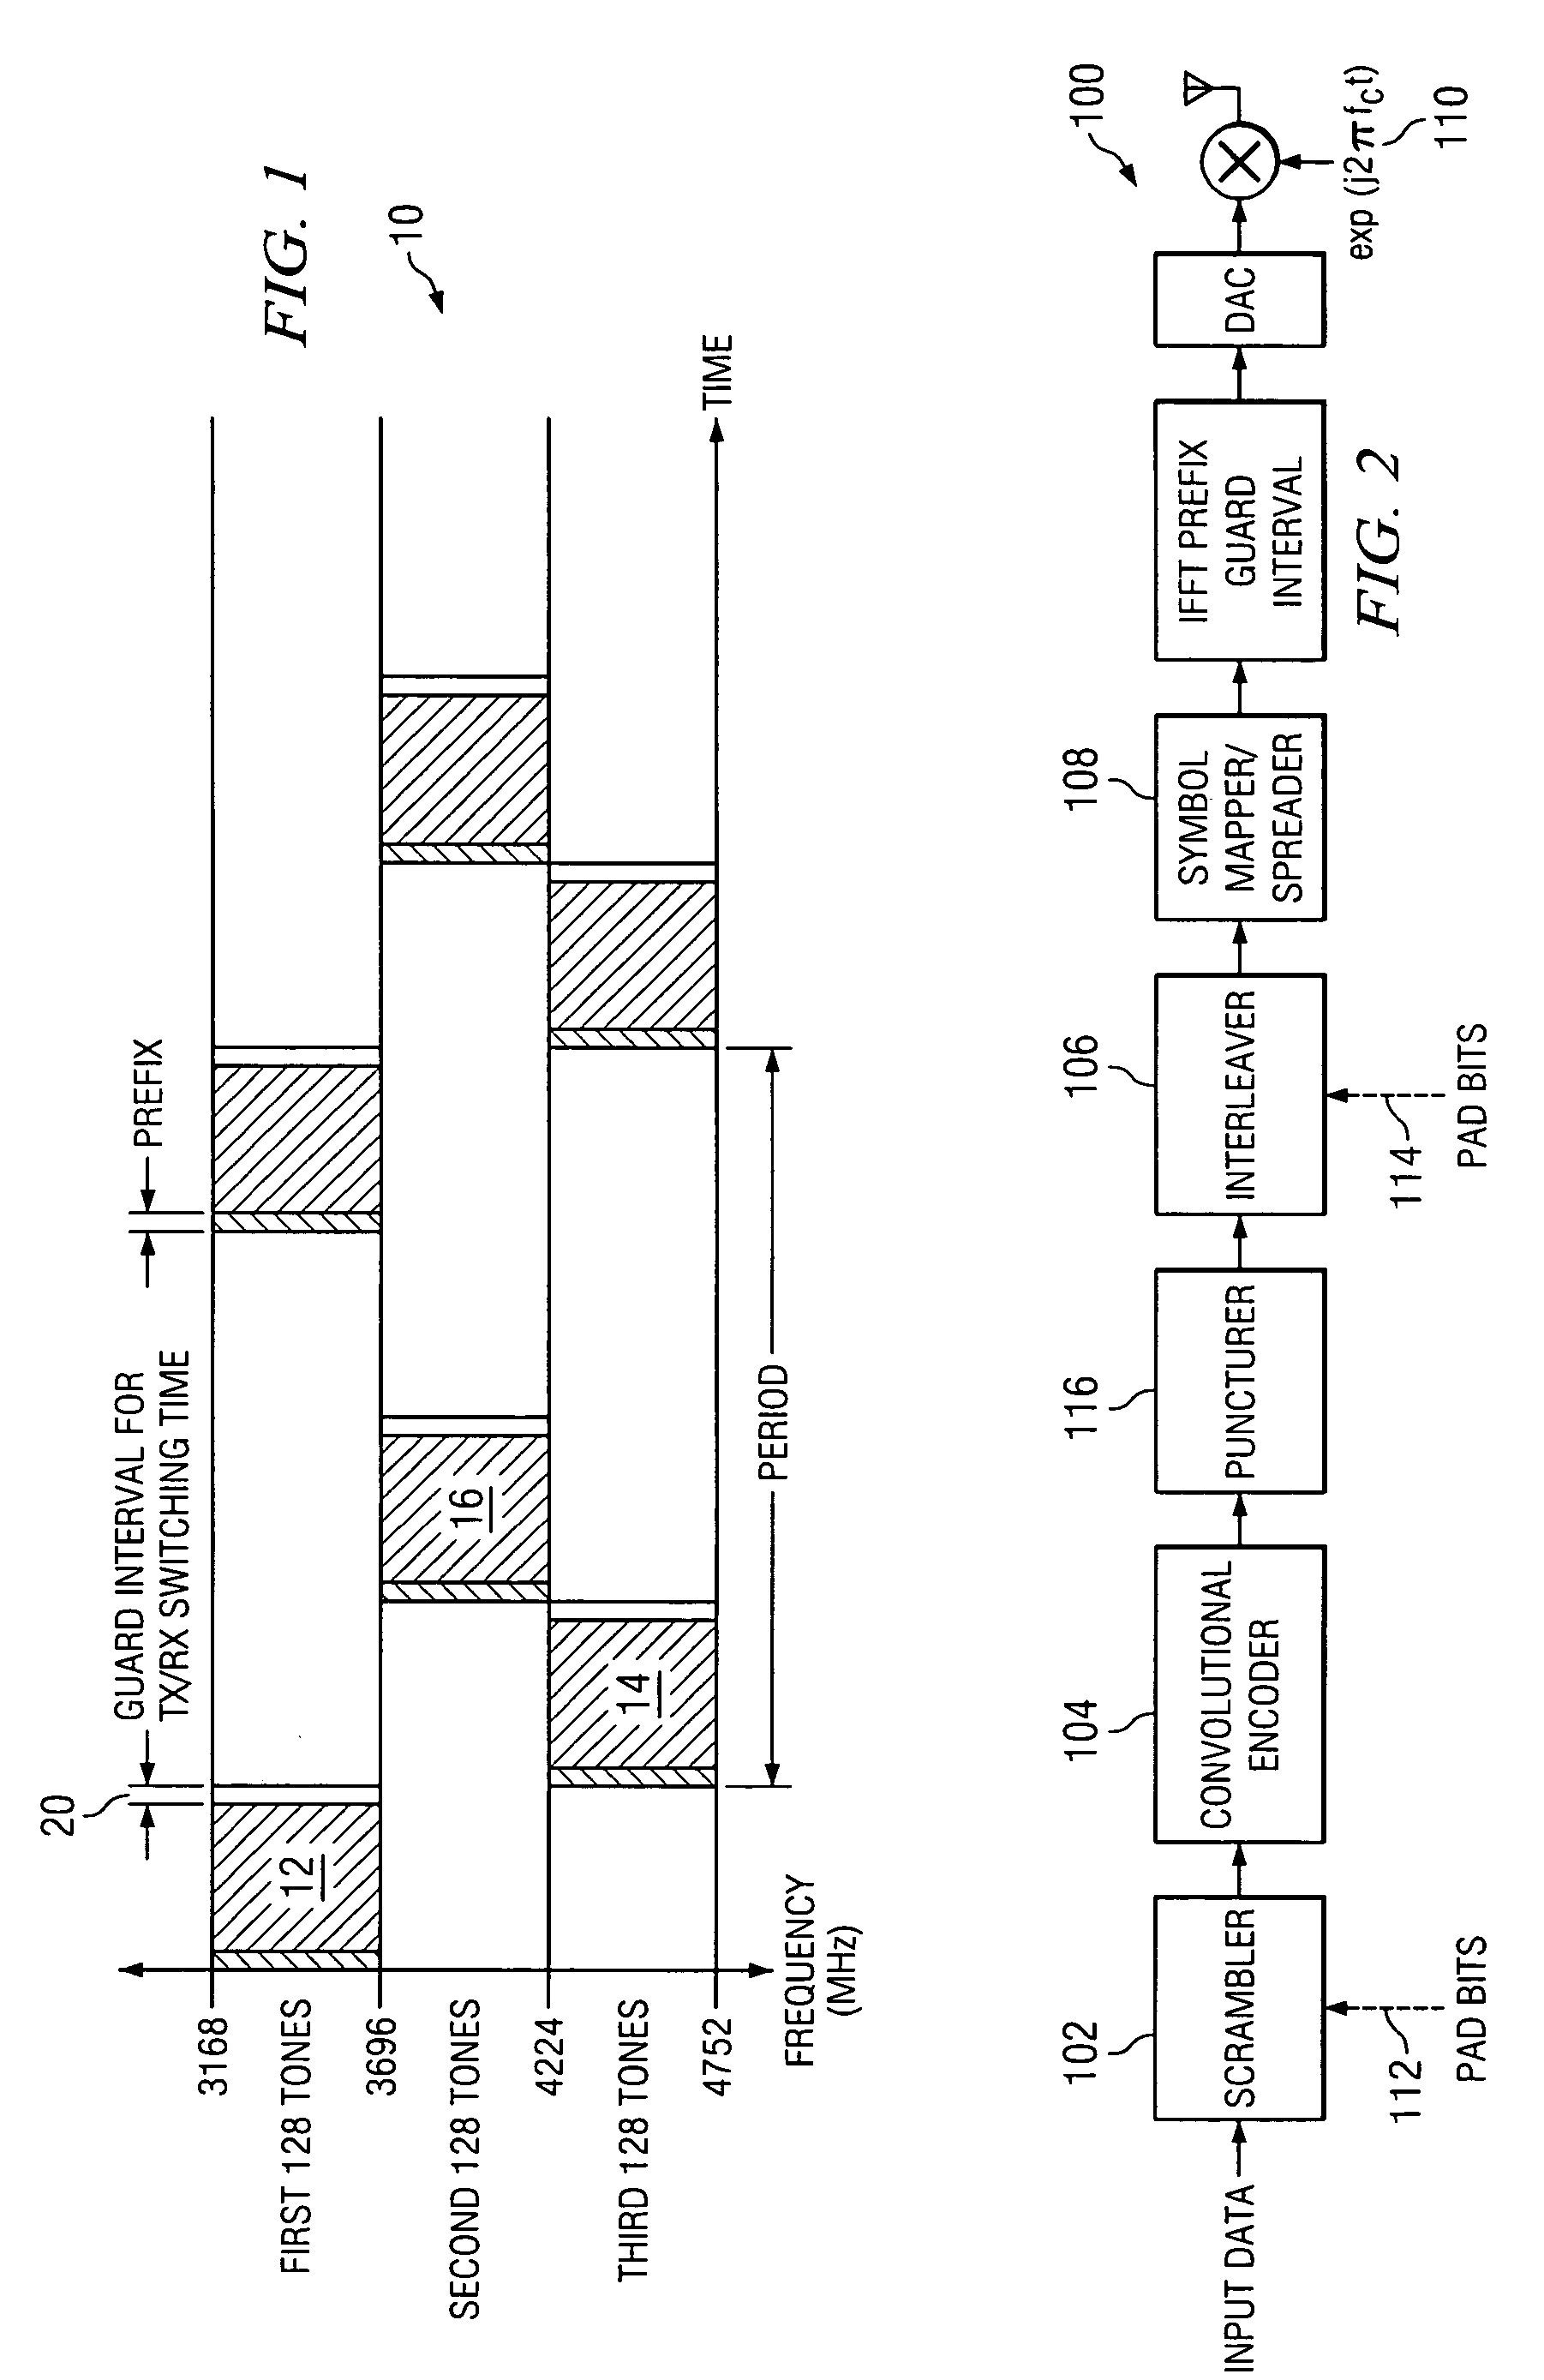 Efficient bit interleaver for a multi-band OFDM ultra-wideband system